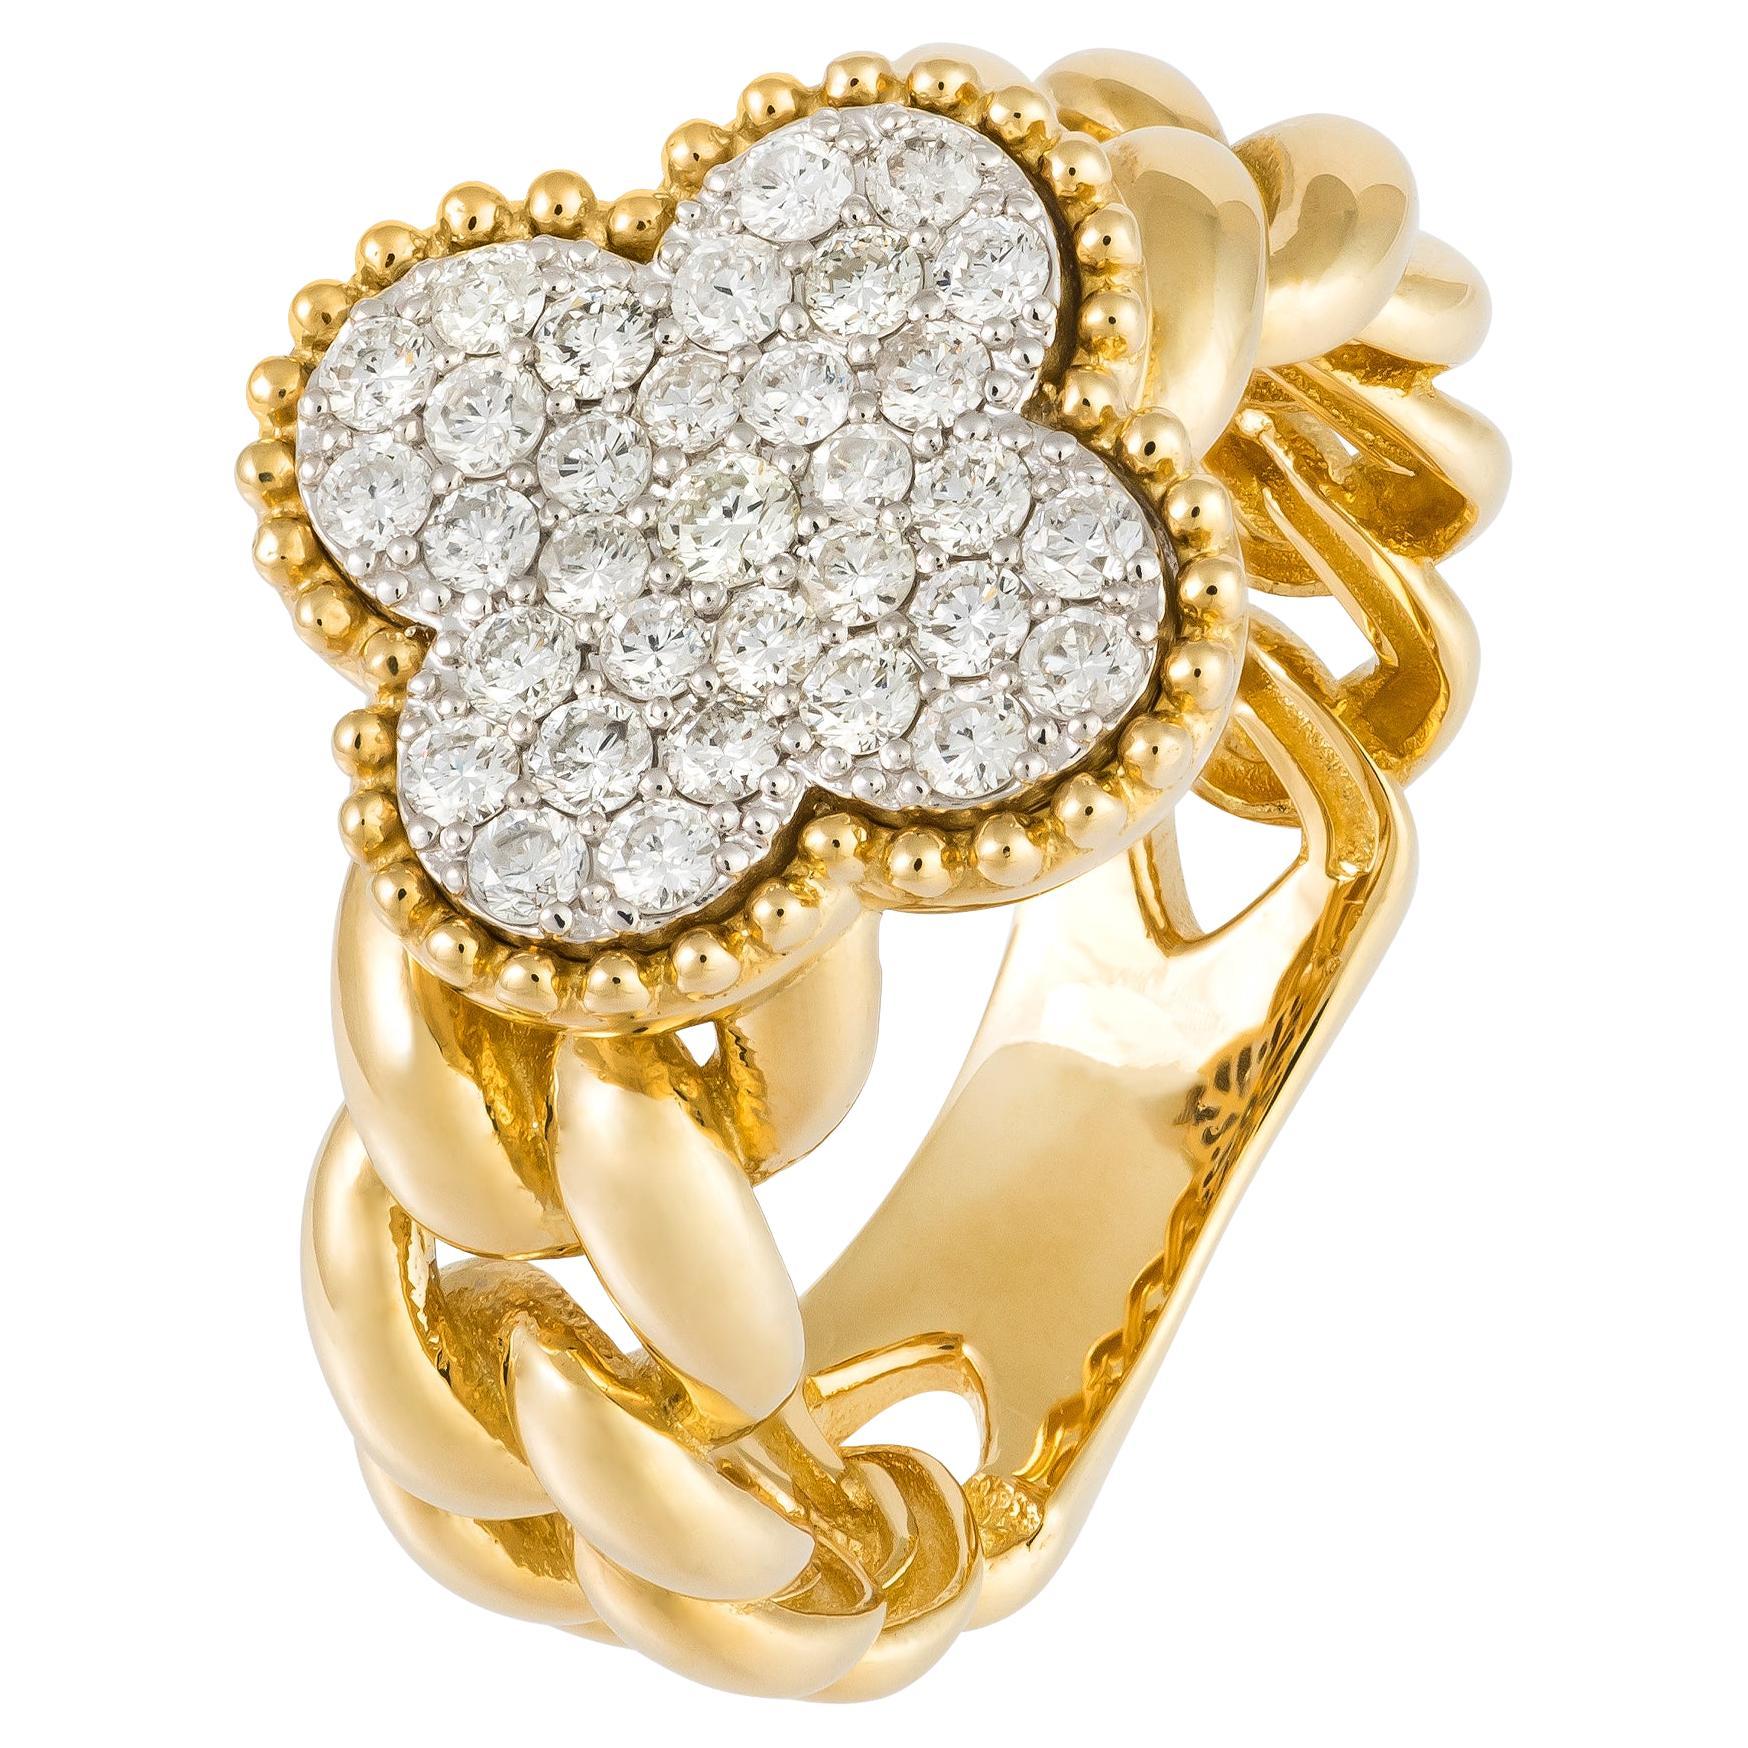 For Sale:  Stunning Yellow 18K Gold White Diamond Ring For Her